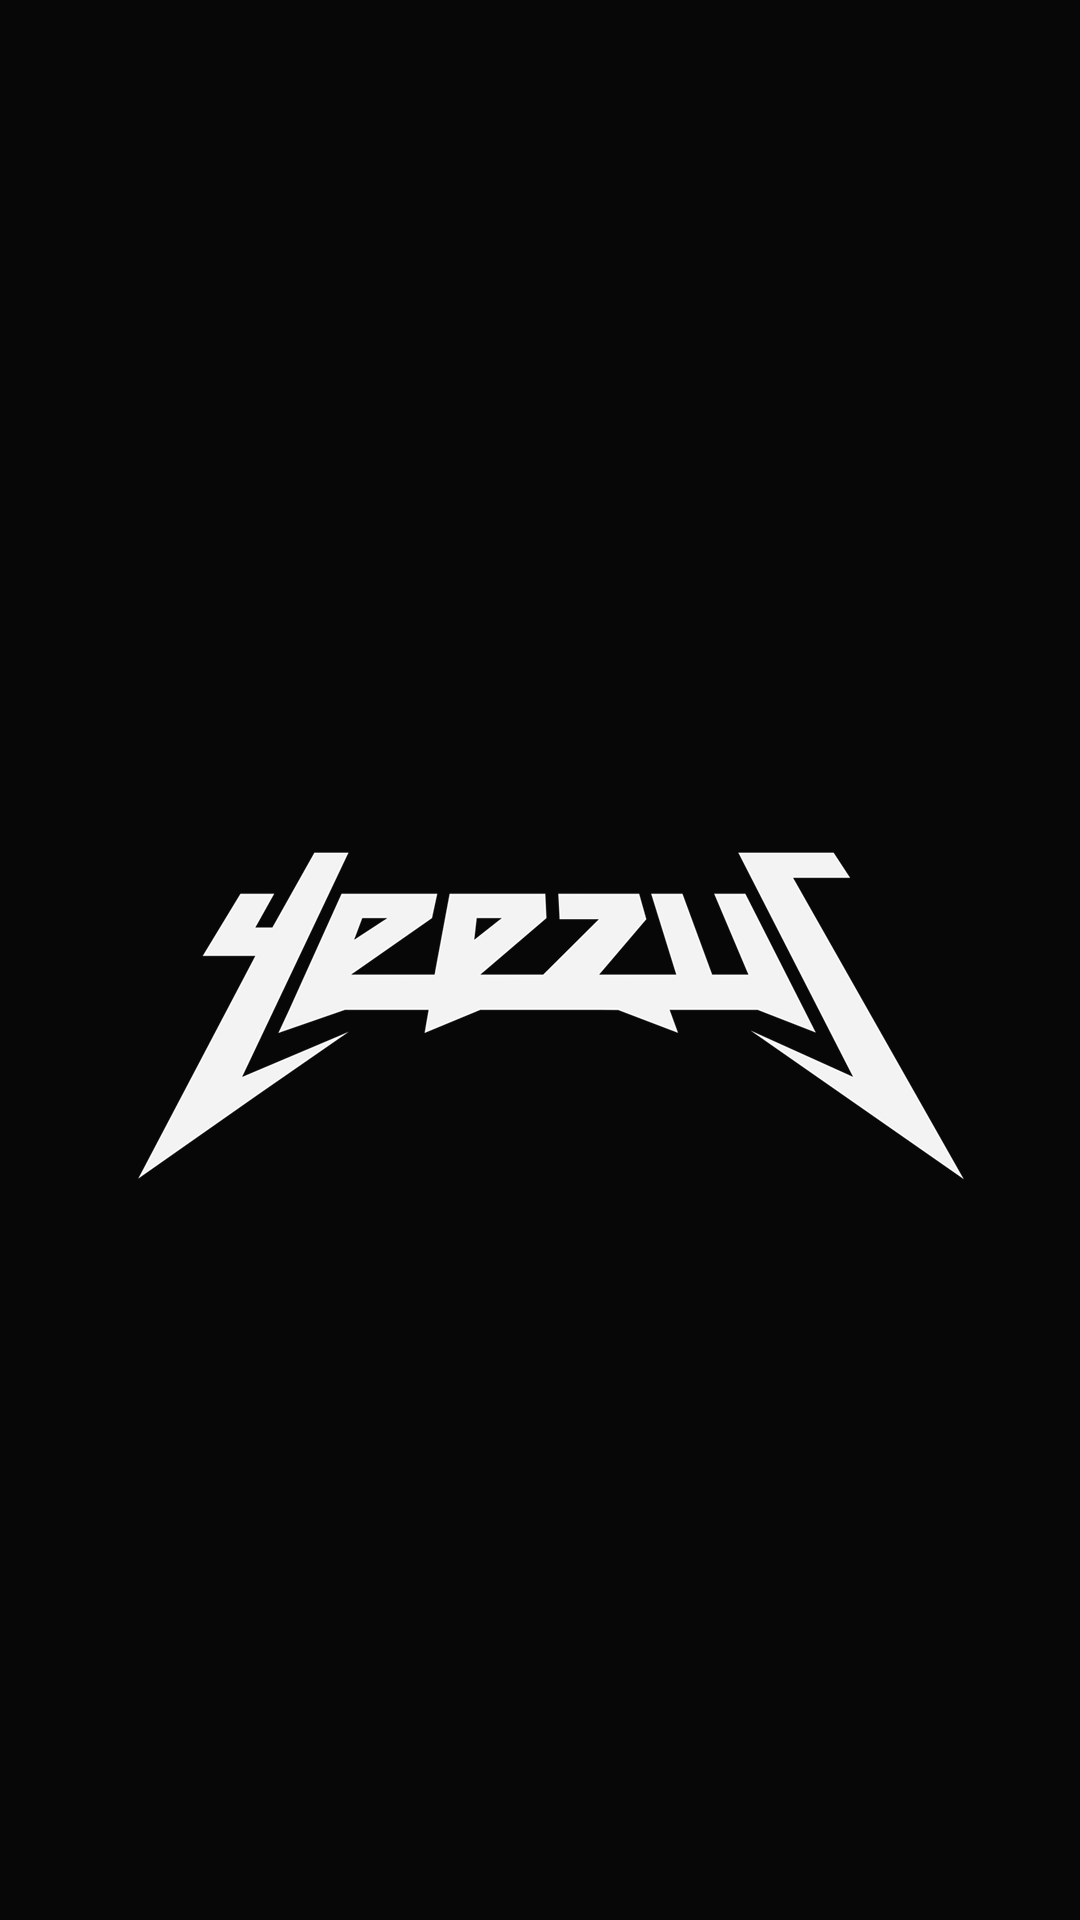 Yeezus Logo - Kanye West rips off Metallica's classic logo? Have you guys seen his